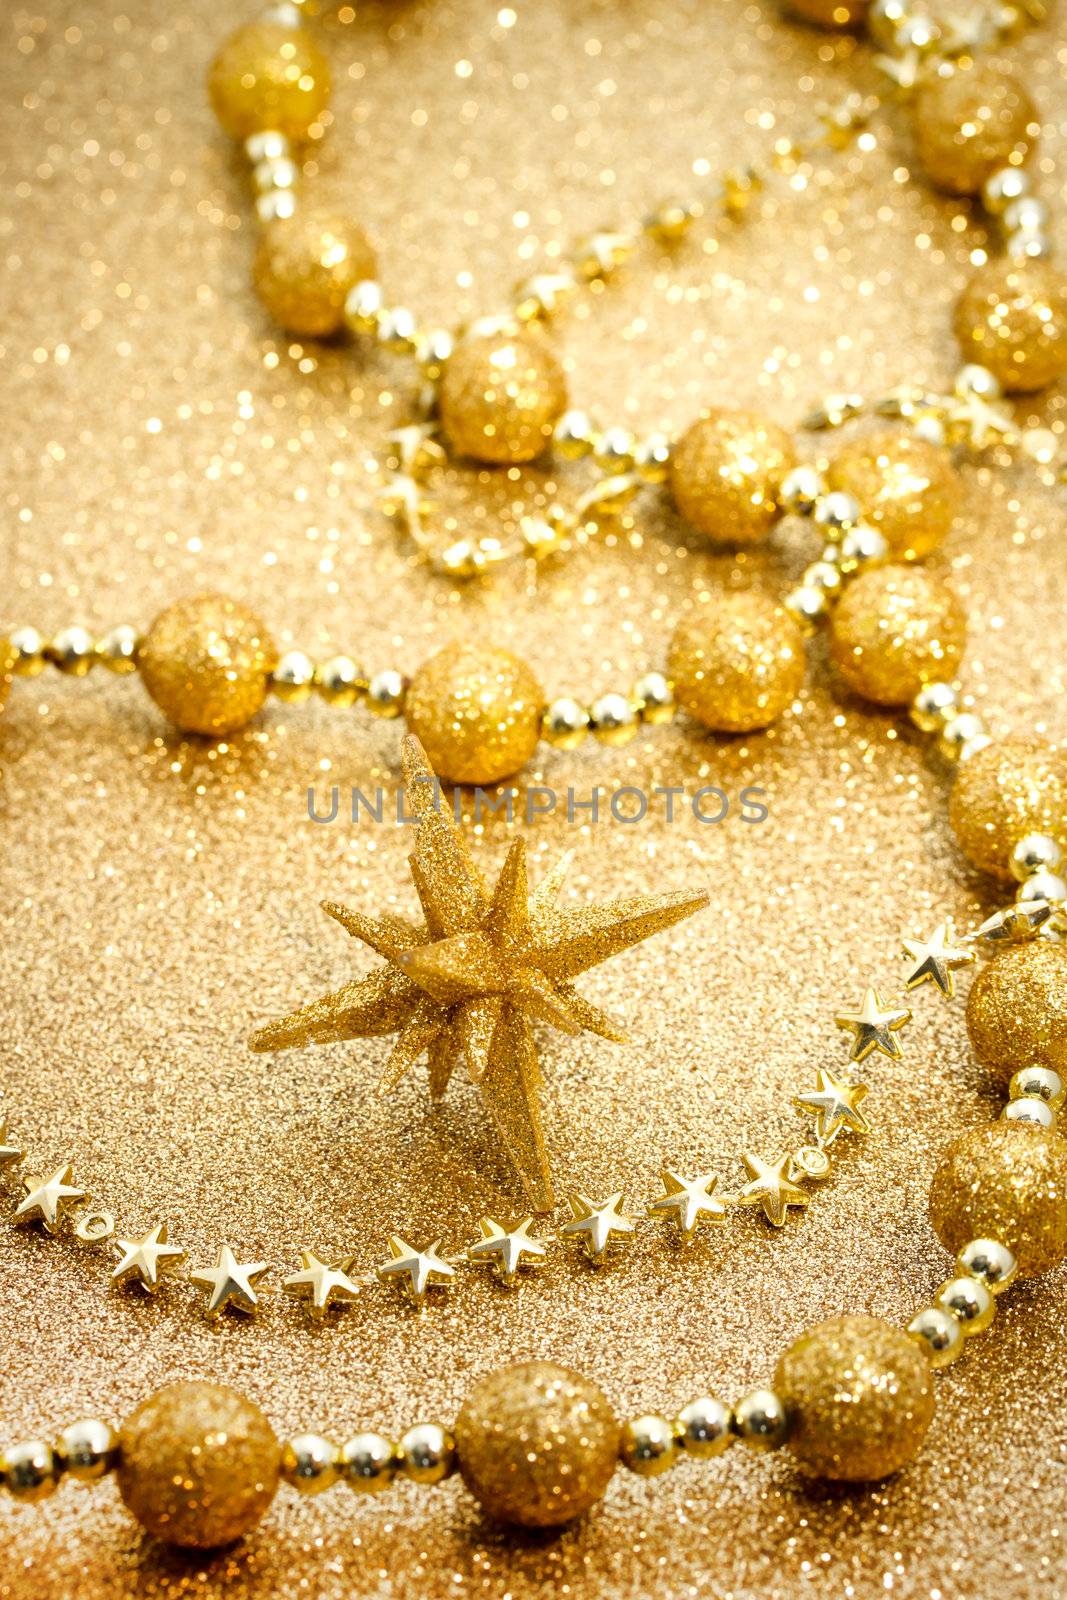 Christmas star with glittering golden ornaments